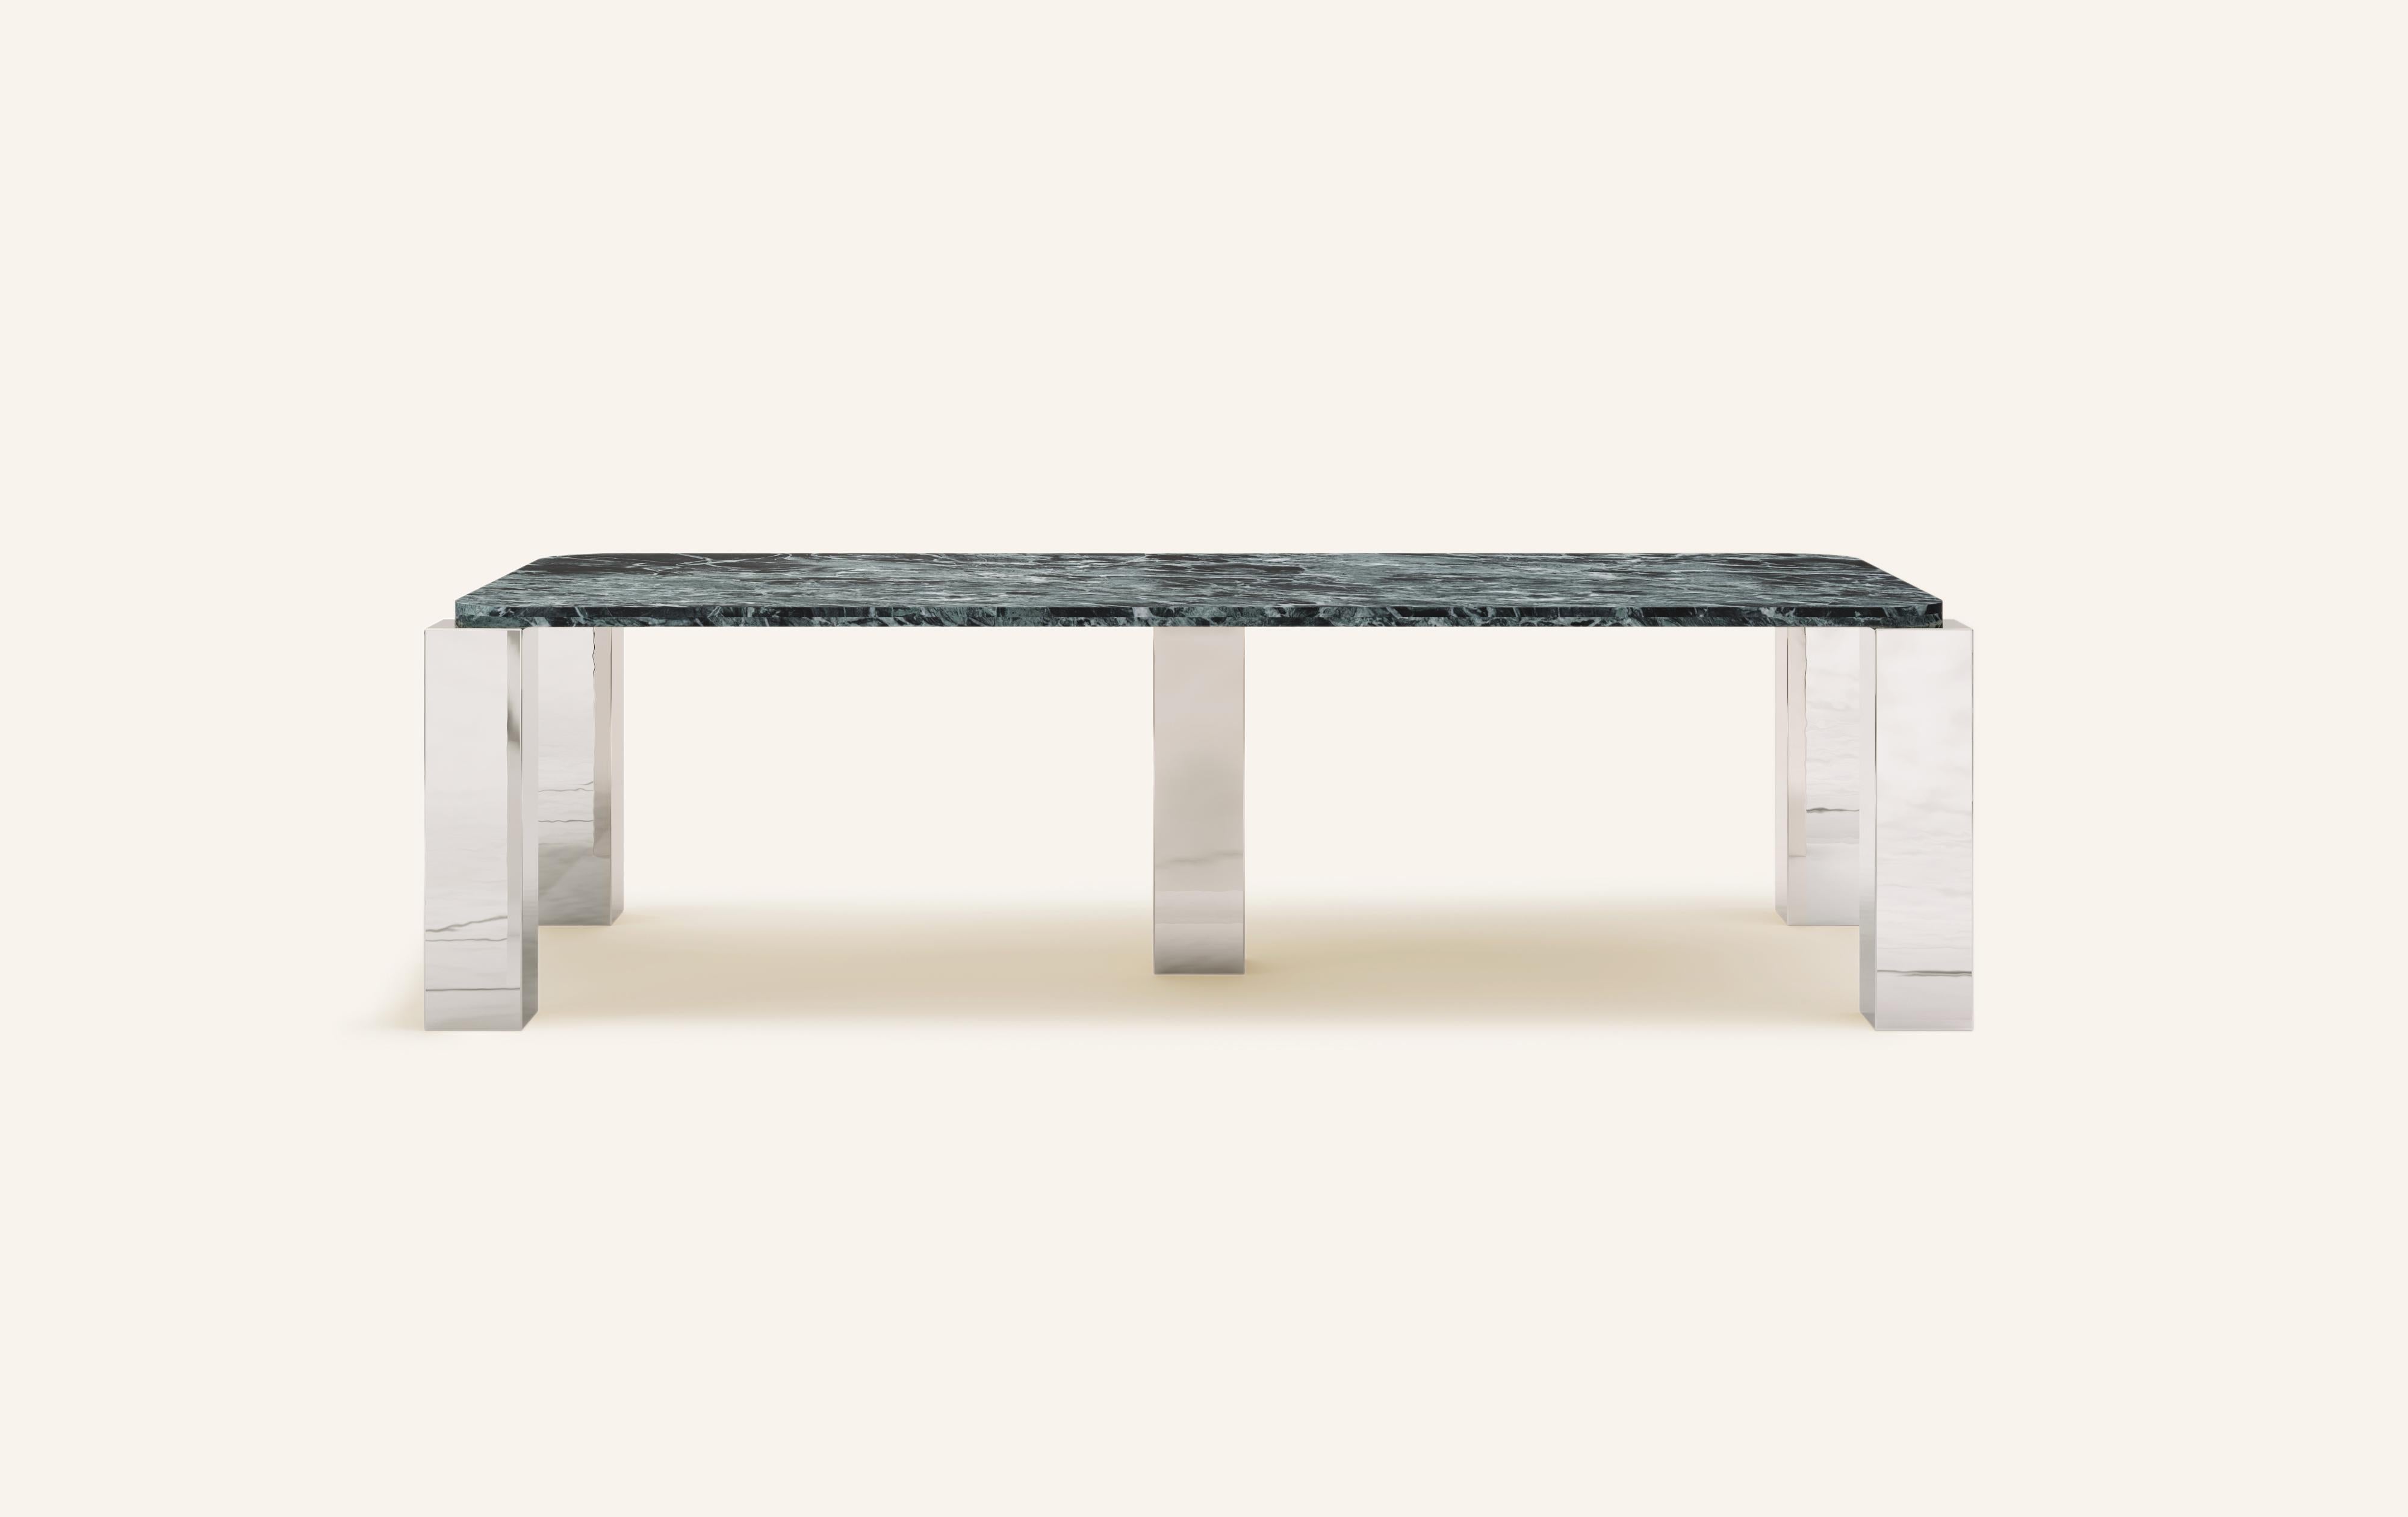 MONOLITHIC FORMS SOFTENED BY GENTLE EDGES. WITH ITS BOLD MARBLE PATTERNS CUBO IS AS VERSATILE AS IT IS STRIKING.

DIMENSIONS:
86”L x 44”W x 30”H: 
- 84”L x 42”W x 1.5” THICK TABLETOP WITH WITH 6